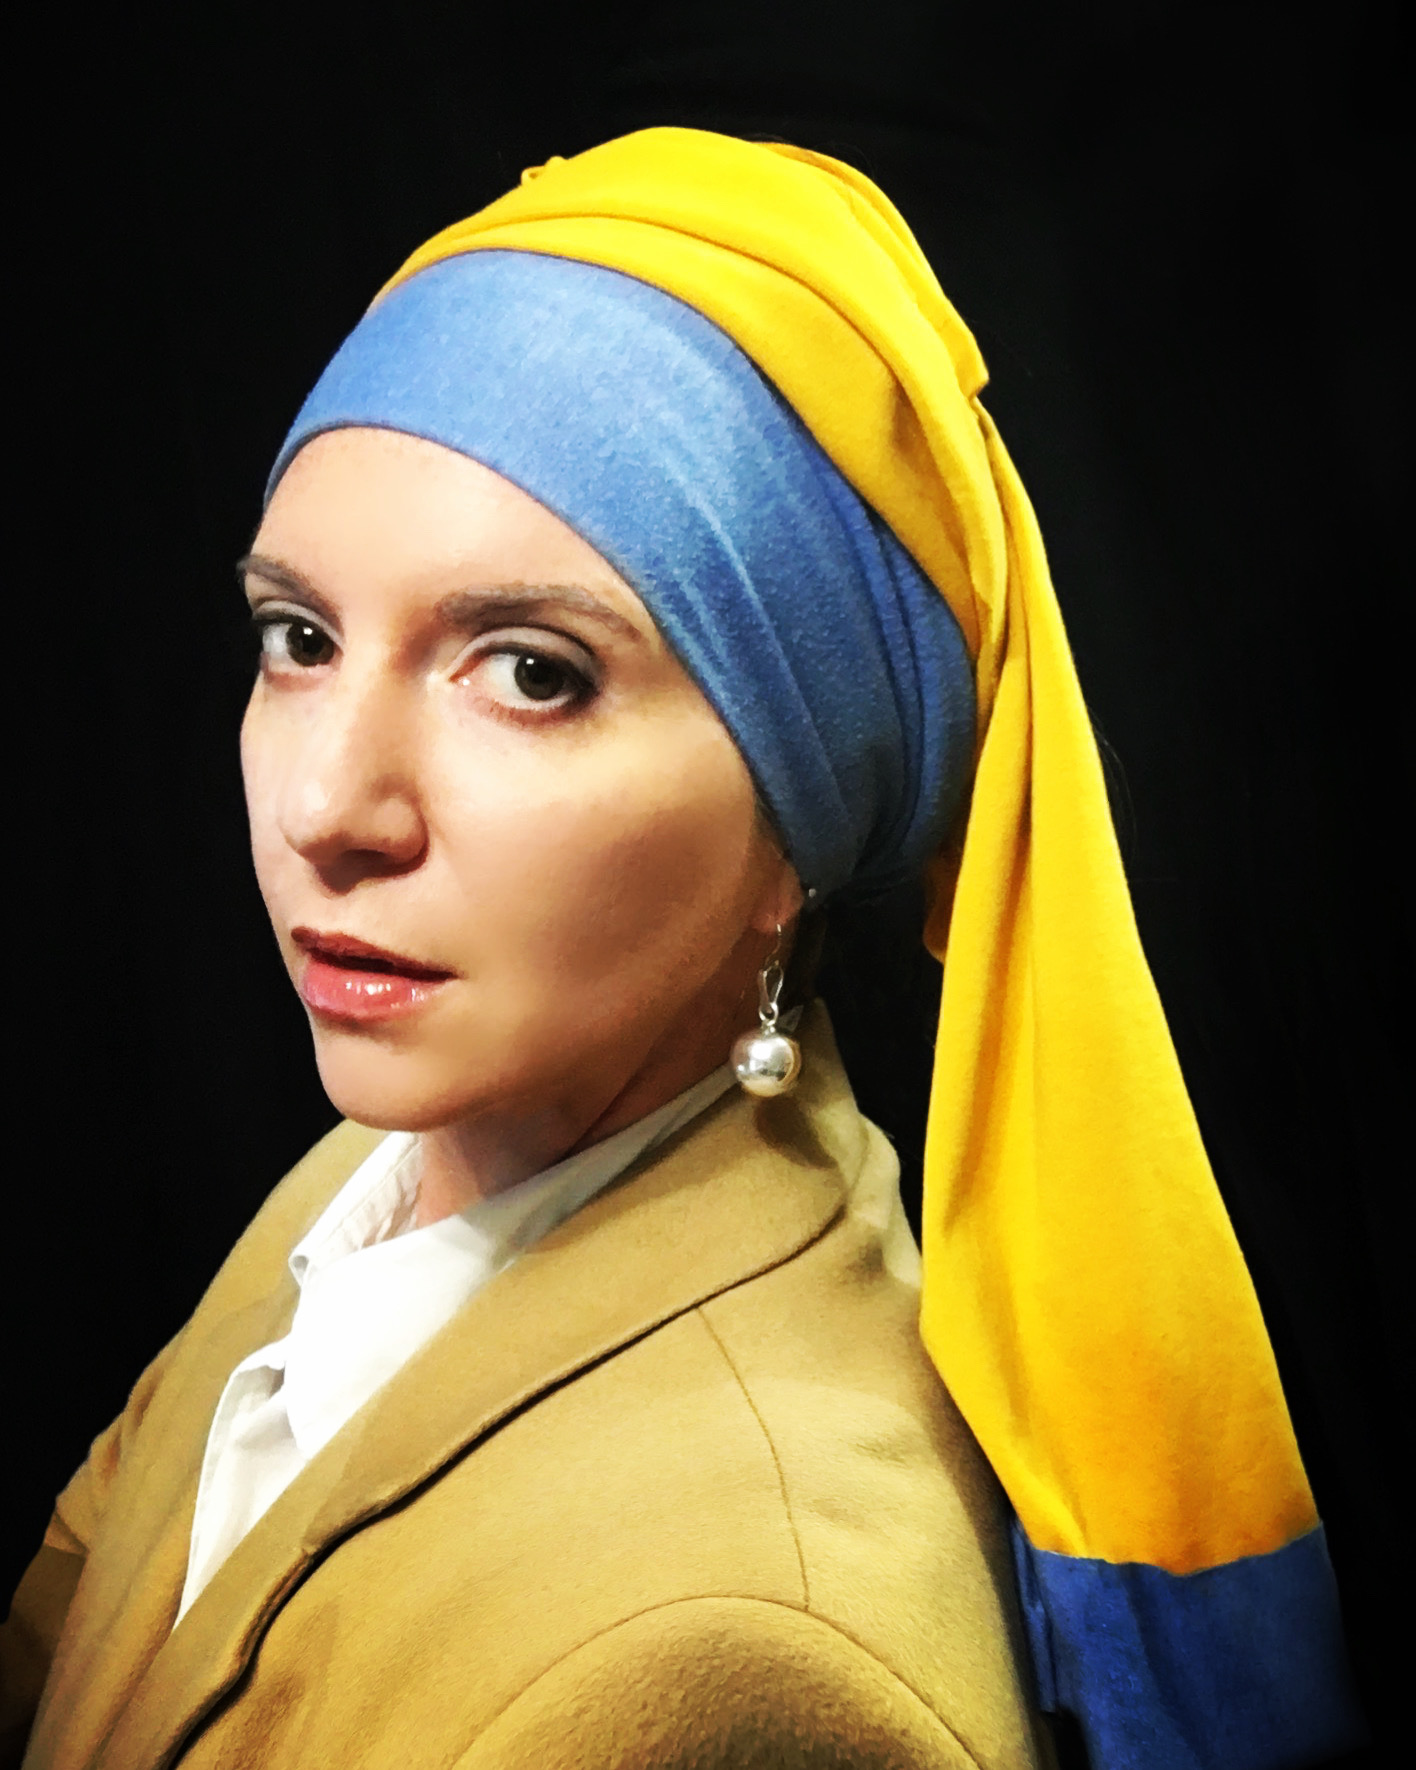 PHOTO: Jennifer De Angelo-Baxter dressed up as “Girl with a Pearl Earring.”